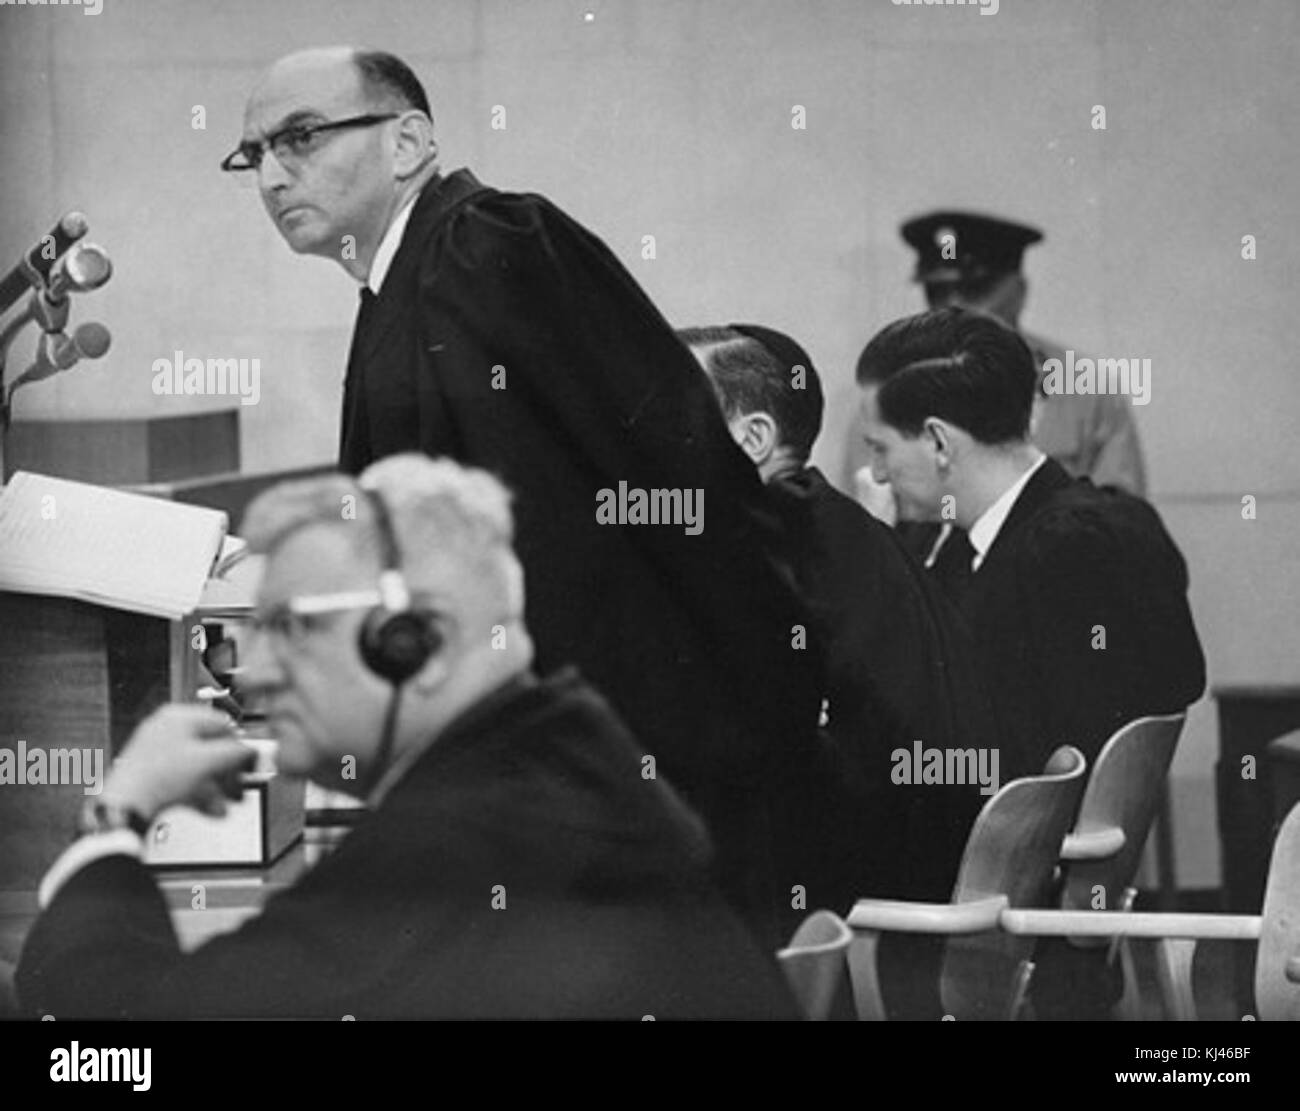 Gideon Hausner and Robert Servatius at the Eichmann trial USHMM No 65284 Stock Photo